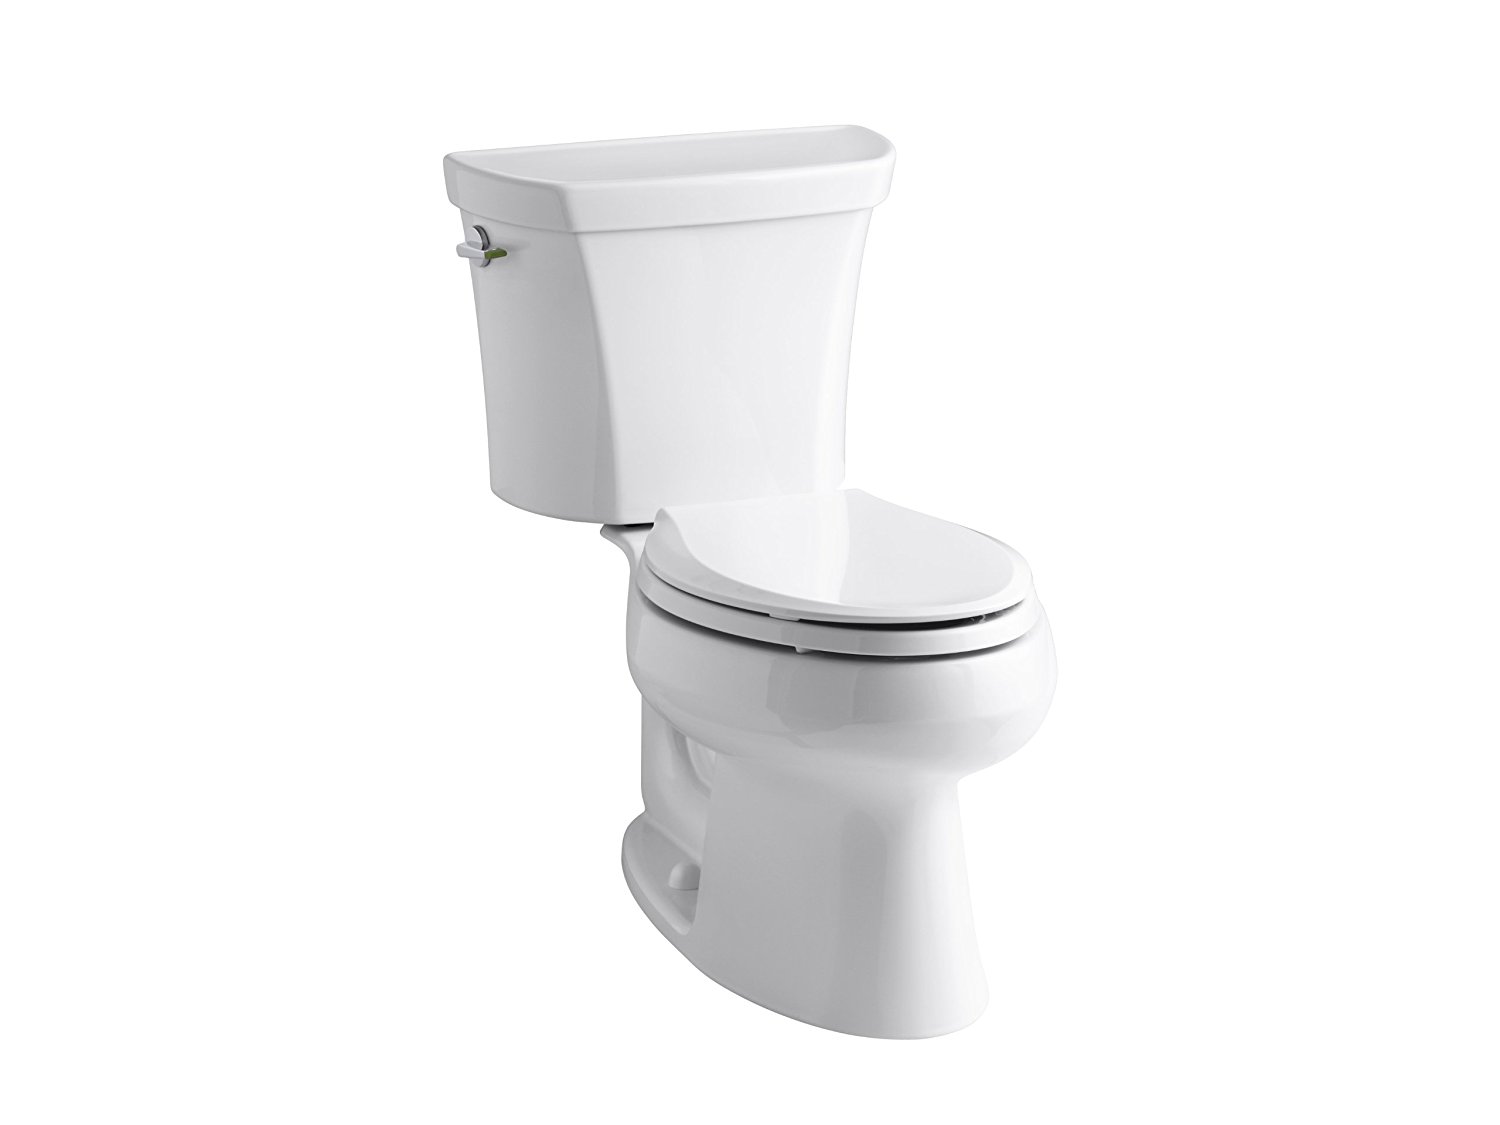 KOHLER K-3988-0 Wellworth Two-Piece Elongated Dual-Flush Toilet with Class Five Flush System and Left-Hand Trip Lever, White